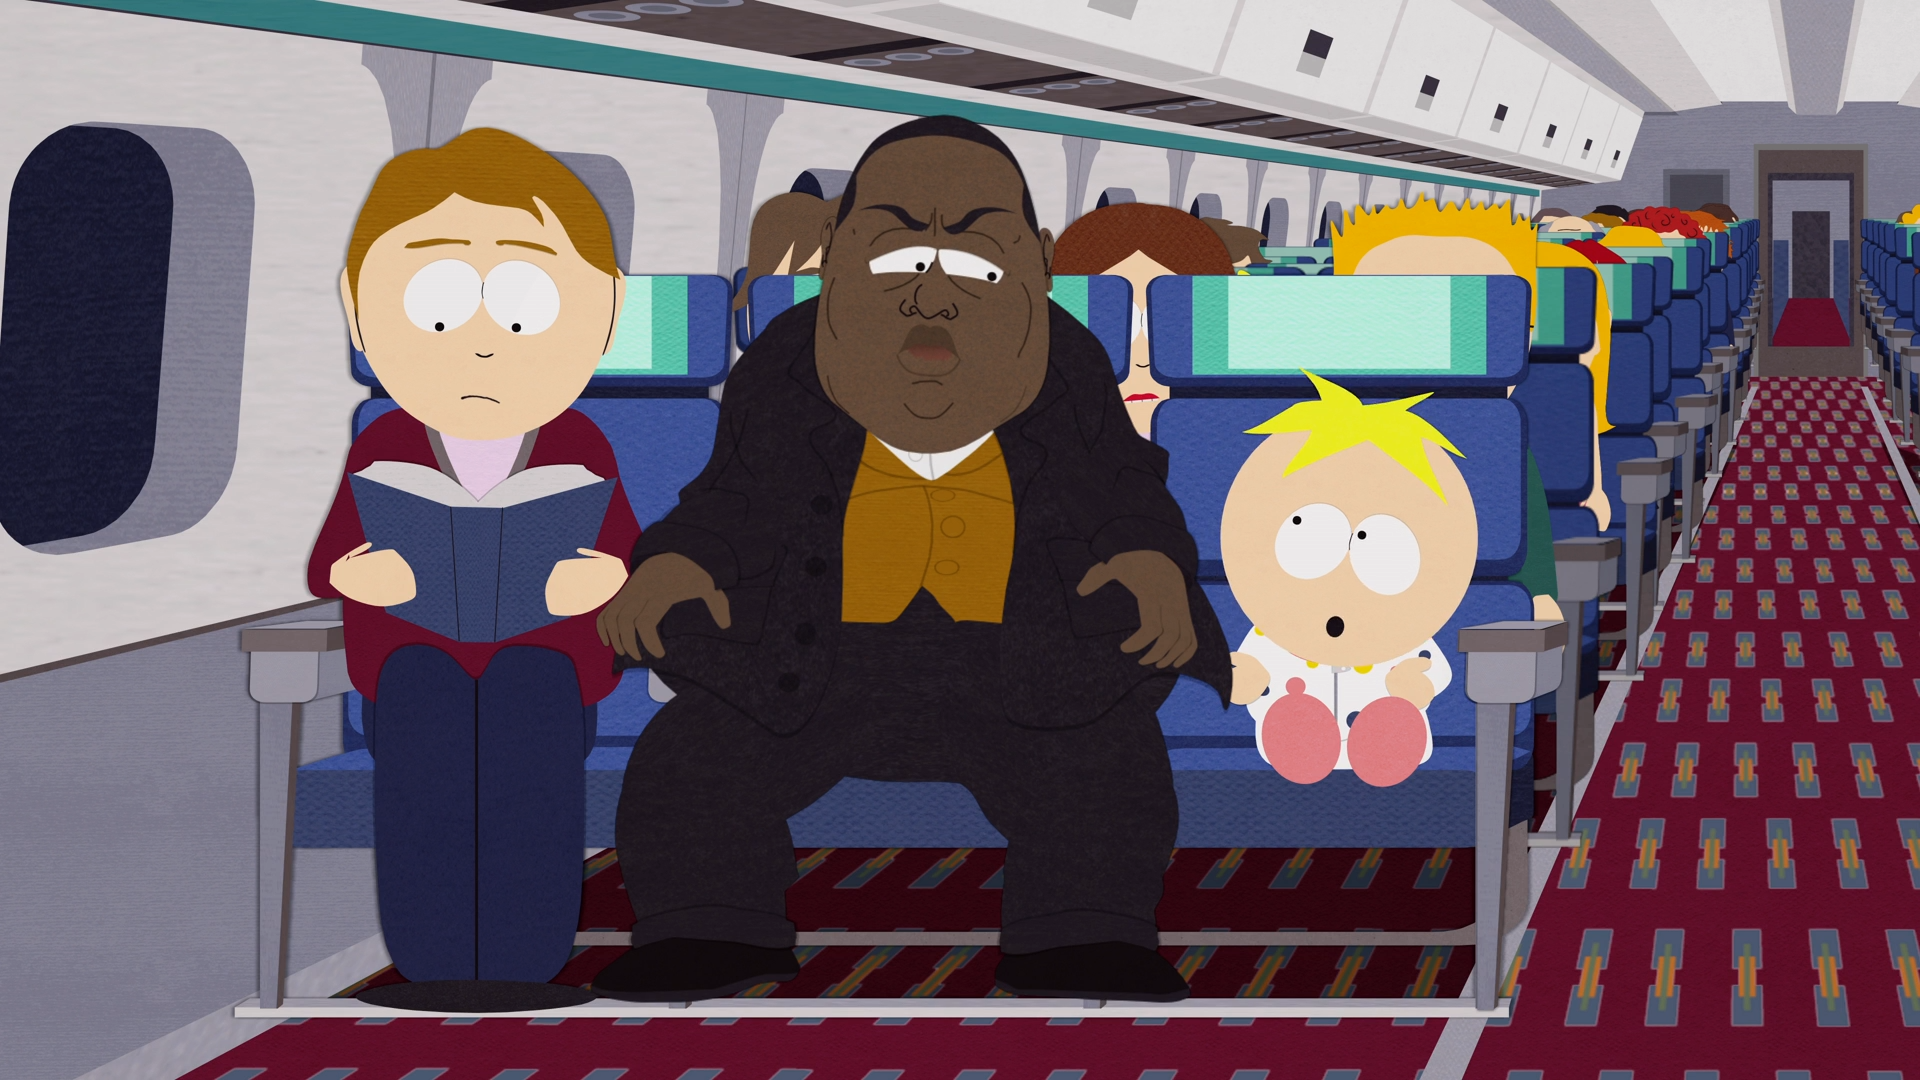 South Park on X:  I'm going going back back to Cali Cali! YO! UH!  #BiggieSmalls #BiggieSmalls  #BiggieSmalls  / X